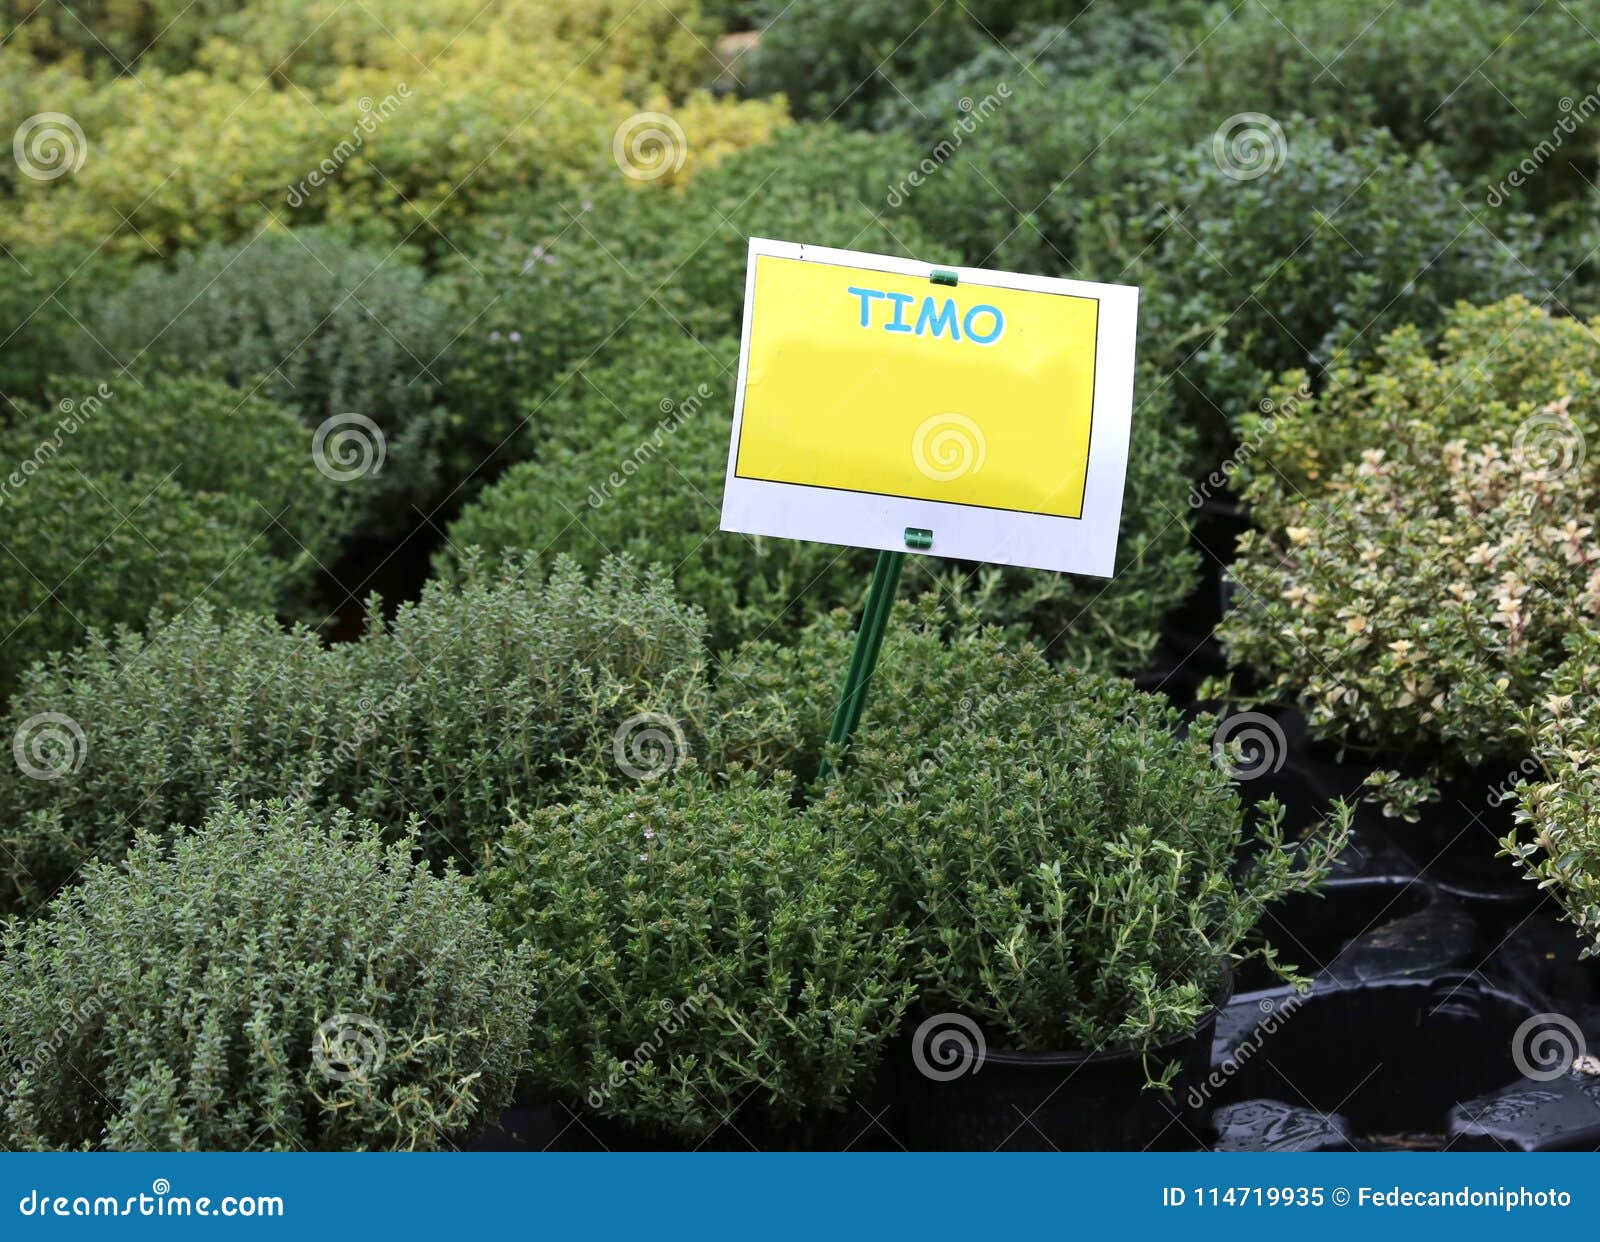 plant with text timo which in italian means thyme